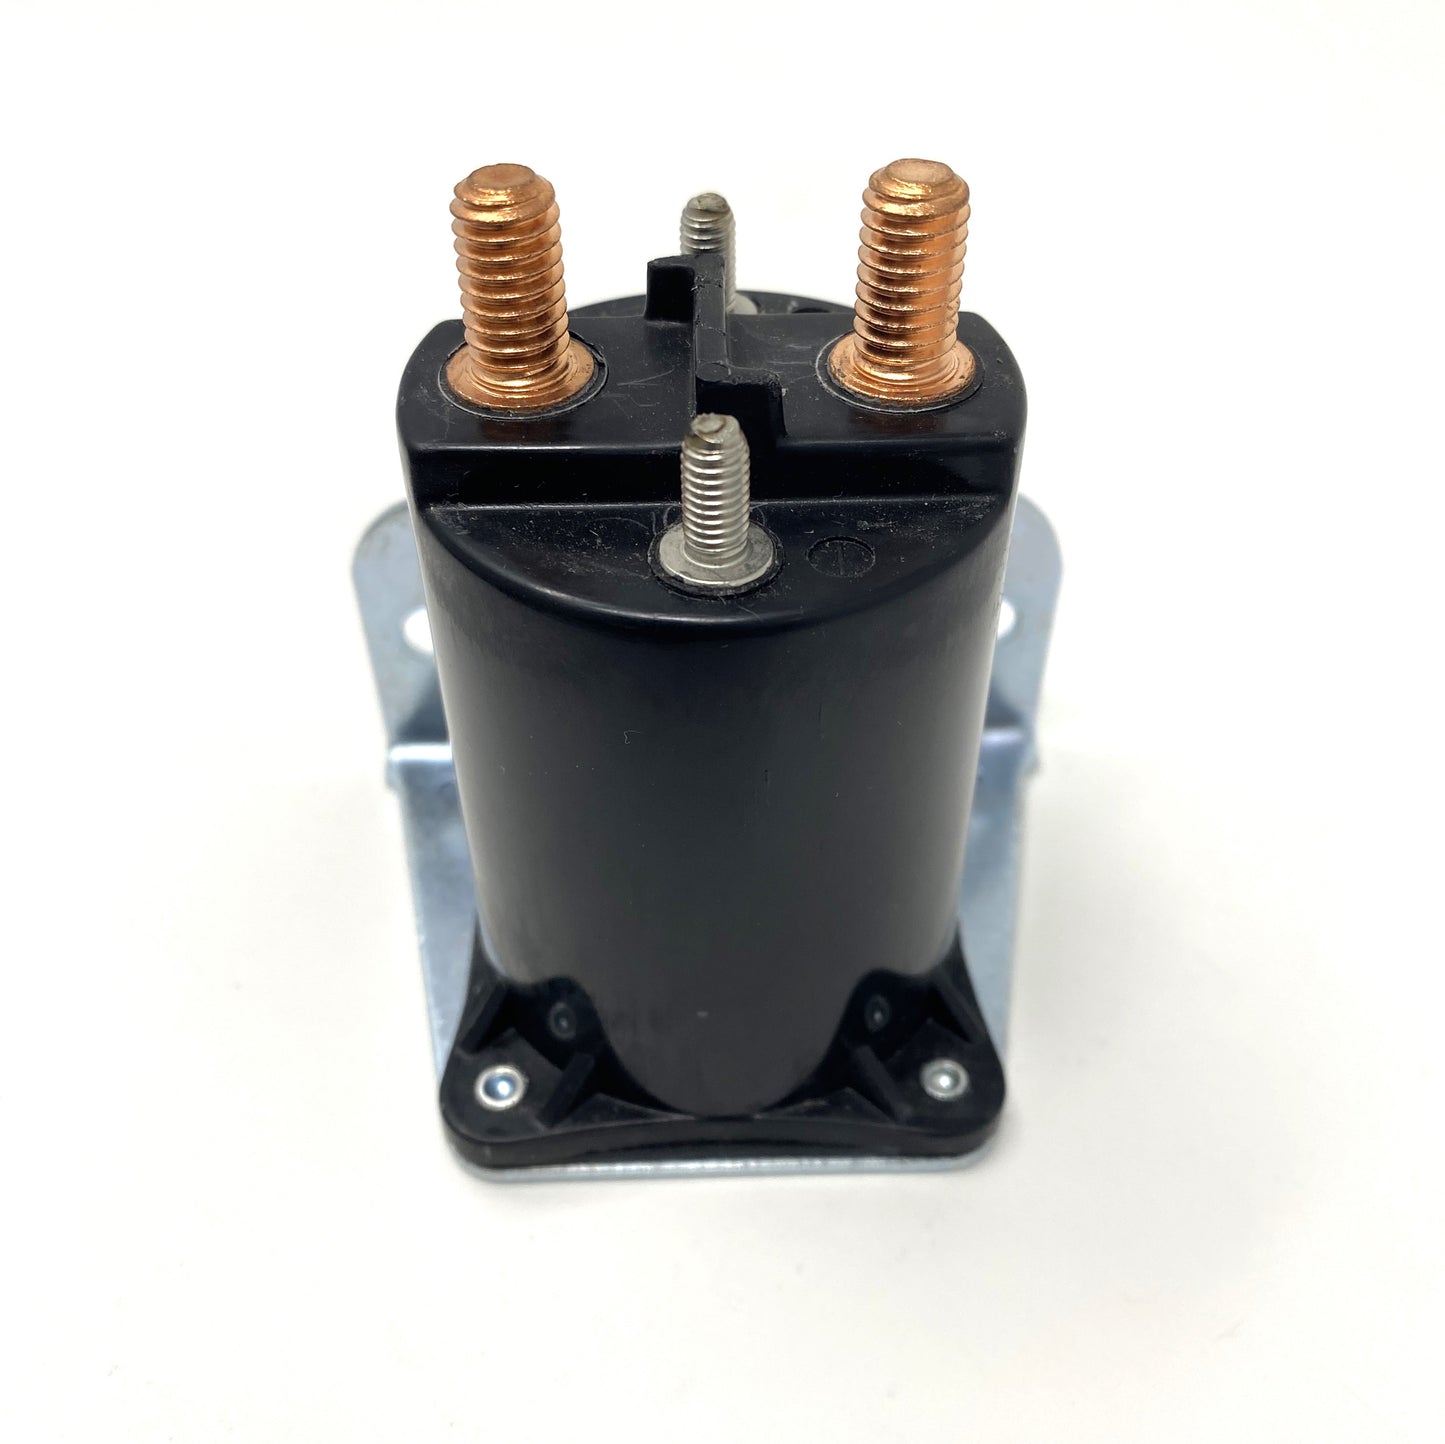 5027096 RLY401612 - Relay, 200A Cont. Duty 12VDC,Solenoid, SPST, Panel Mount